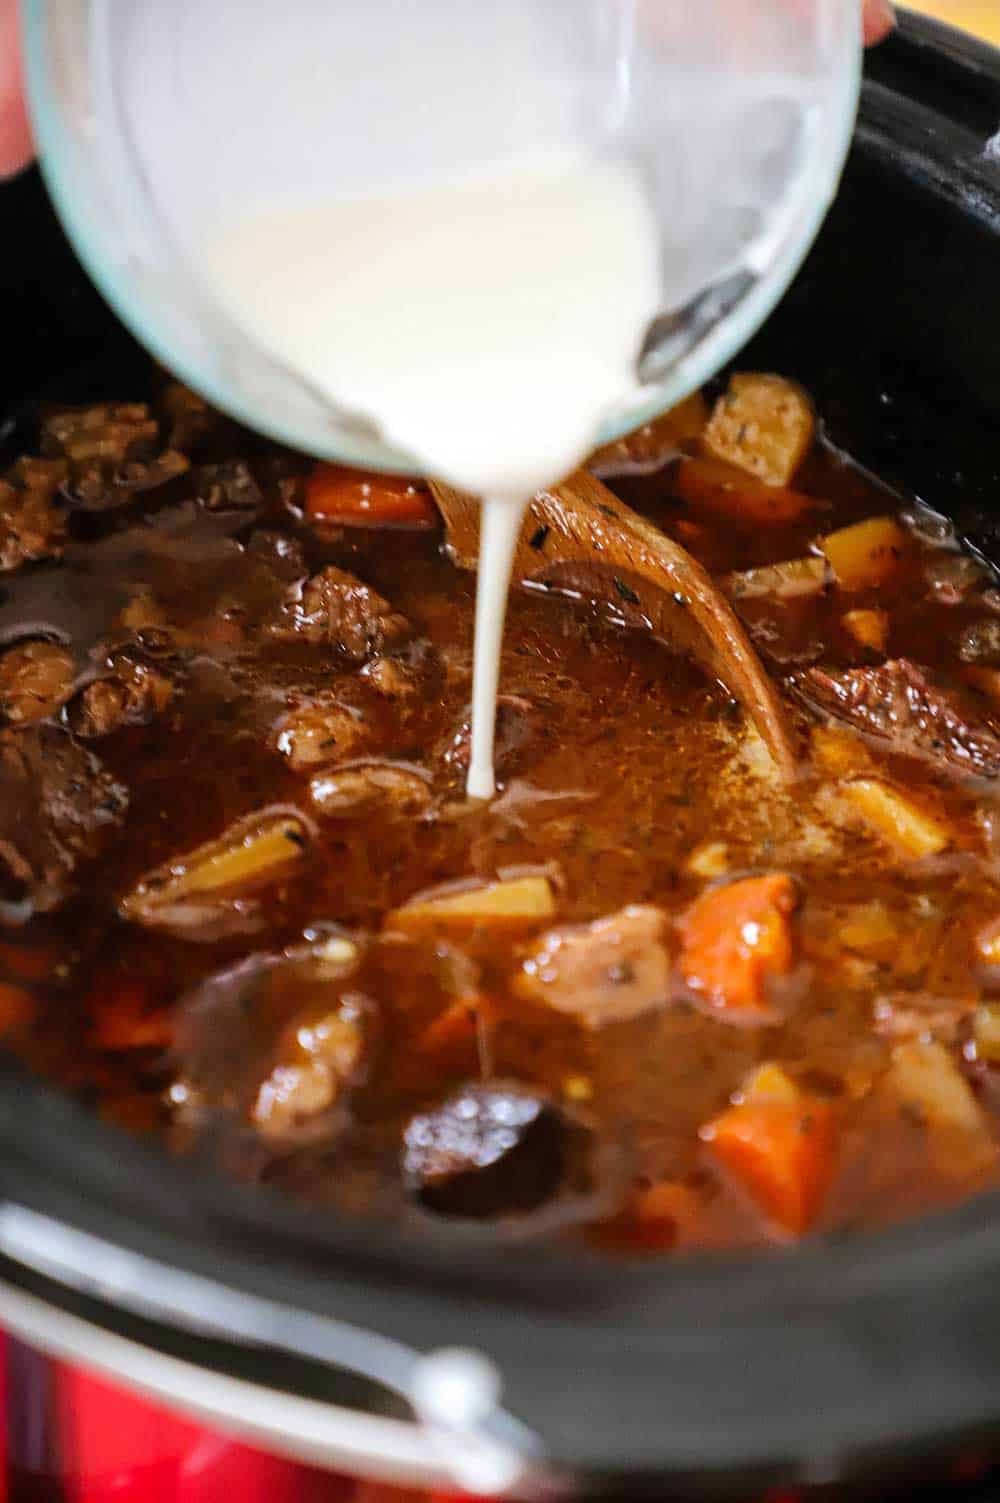 A cornstarch slurry being poured from a small glass bowl into a slow cooker filled with beef stew.